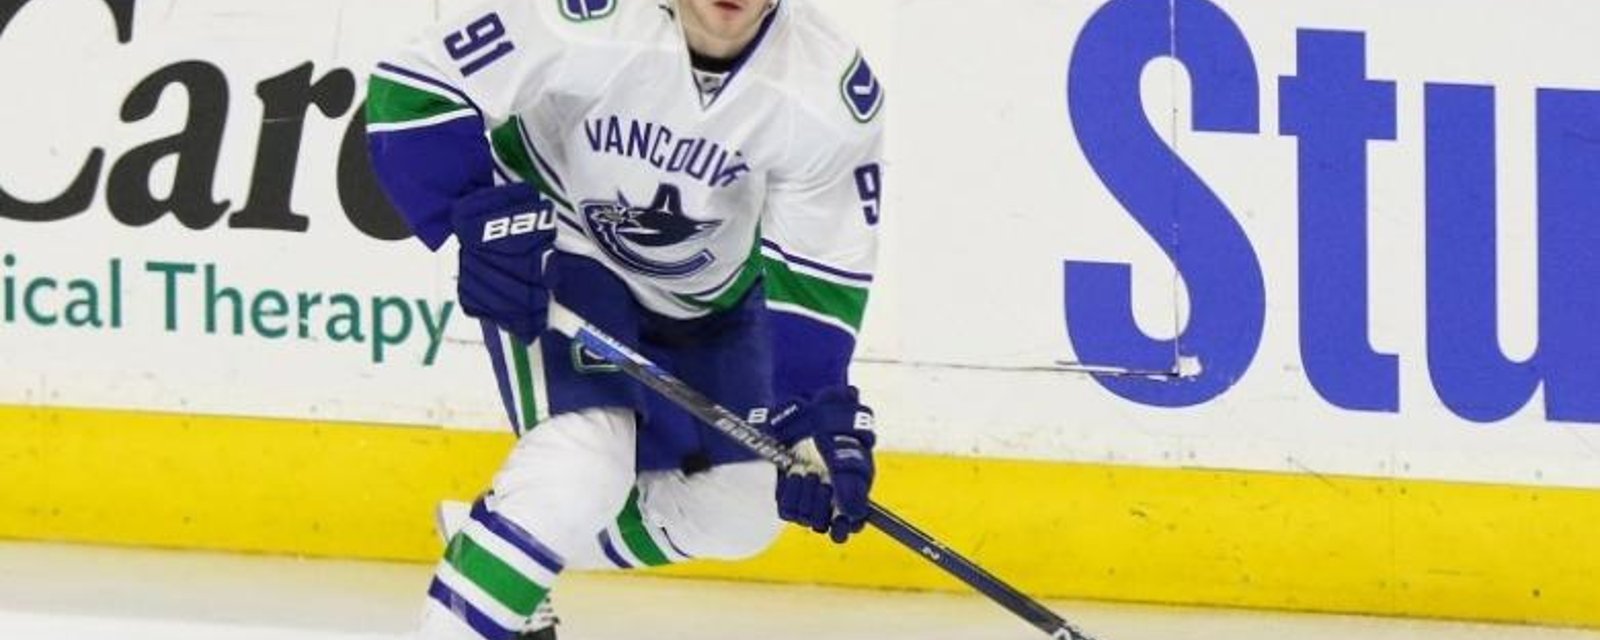 Canucks’ McCann Centering The First Line Offers Glimpse Into The Future